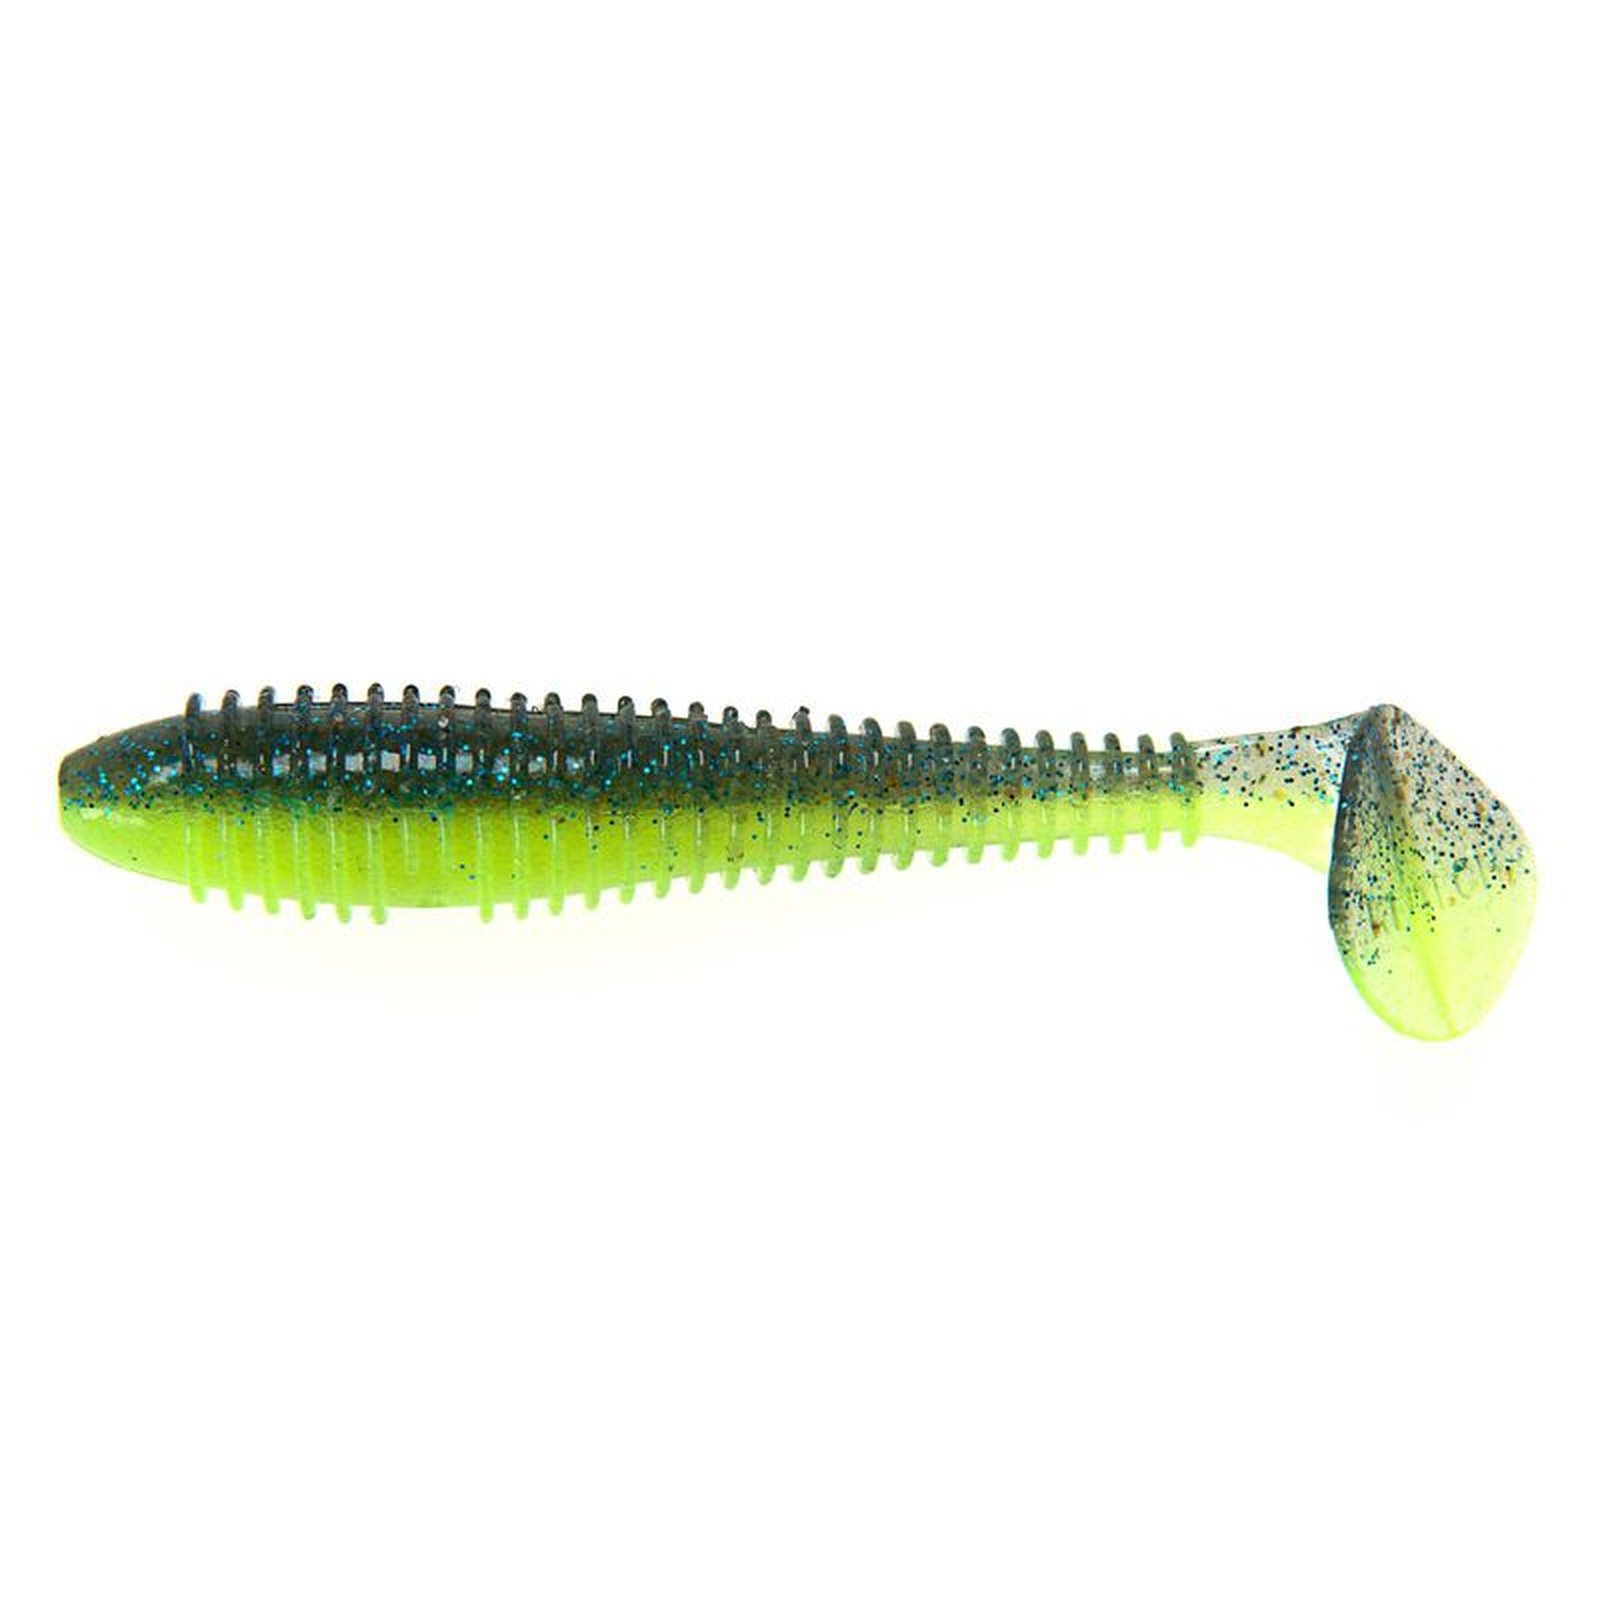 Keitech Fat Swing Impact 2,8 Chartreuse Thunder